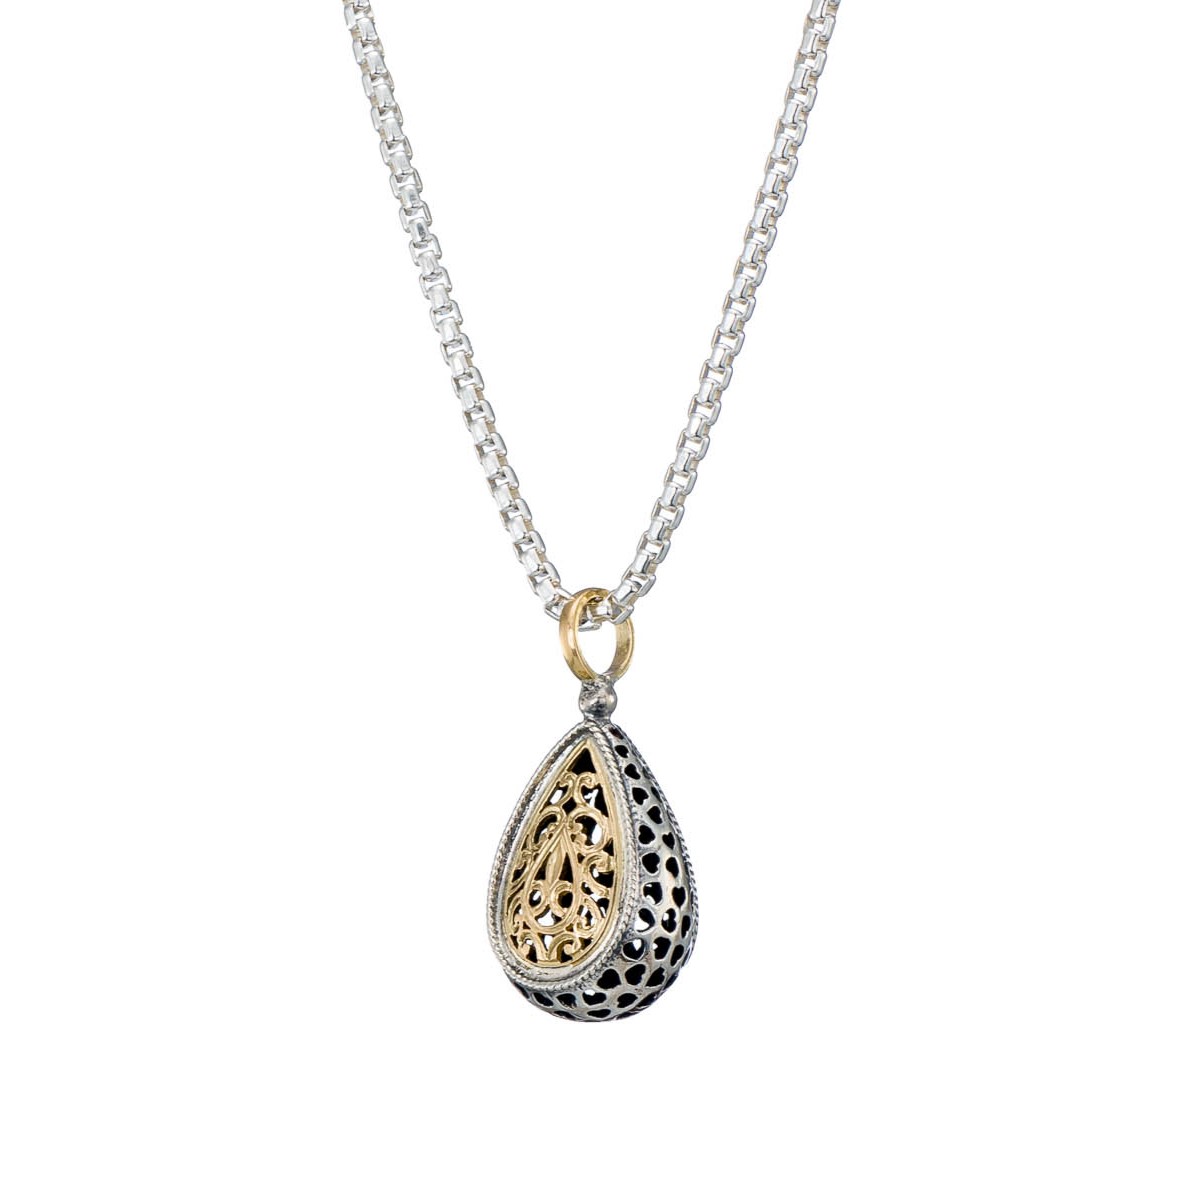 Garden Shadows Drop Pendant in 18K Gold and Sterling Silver